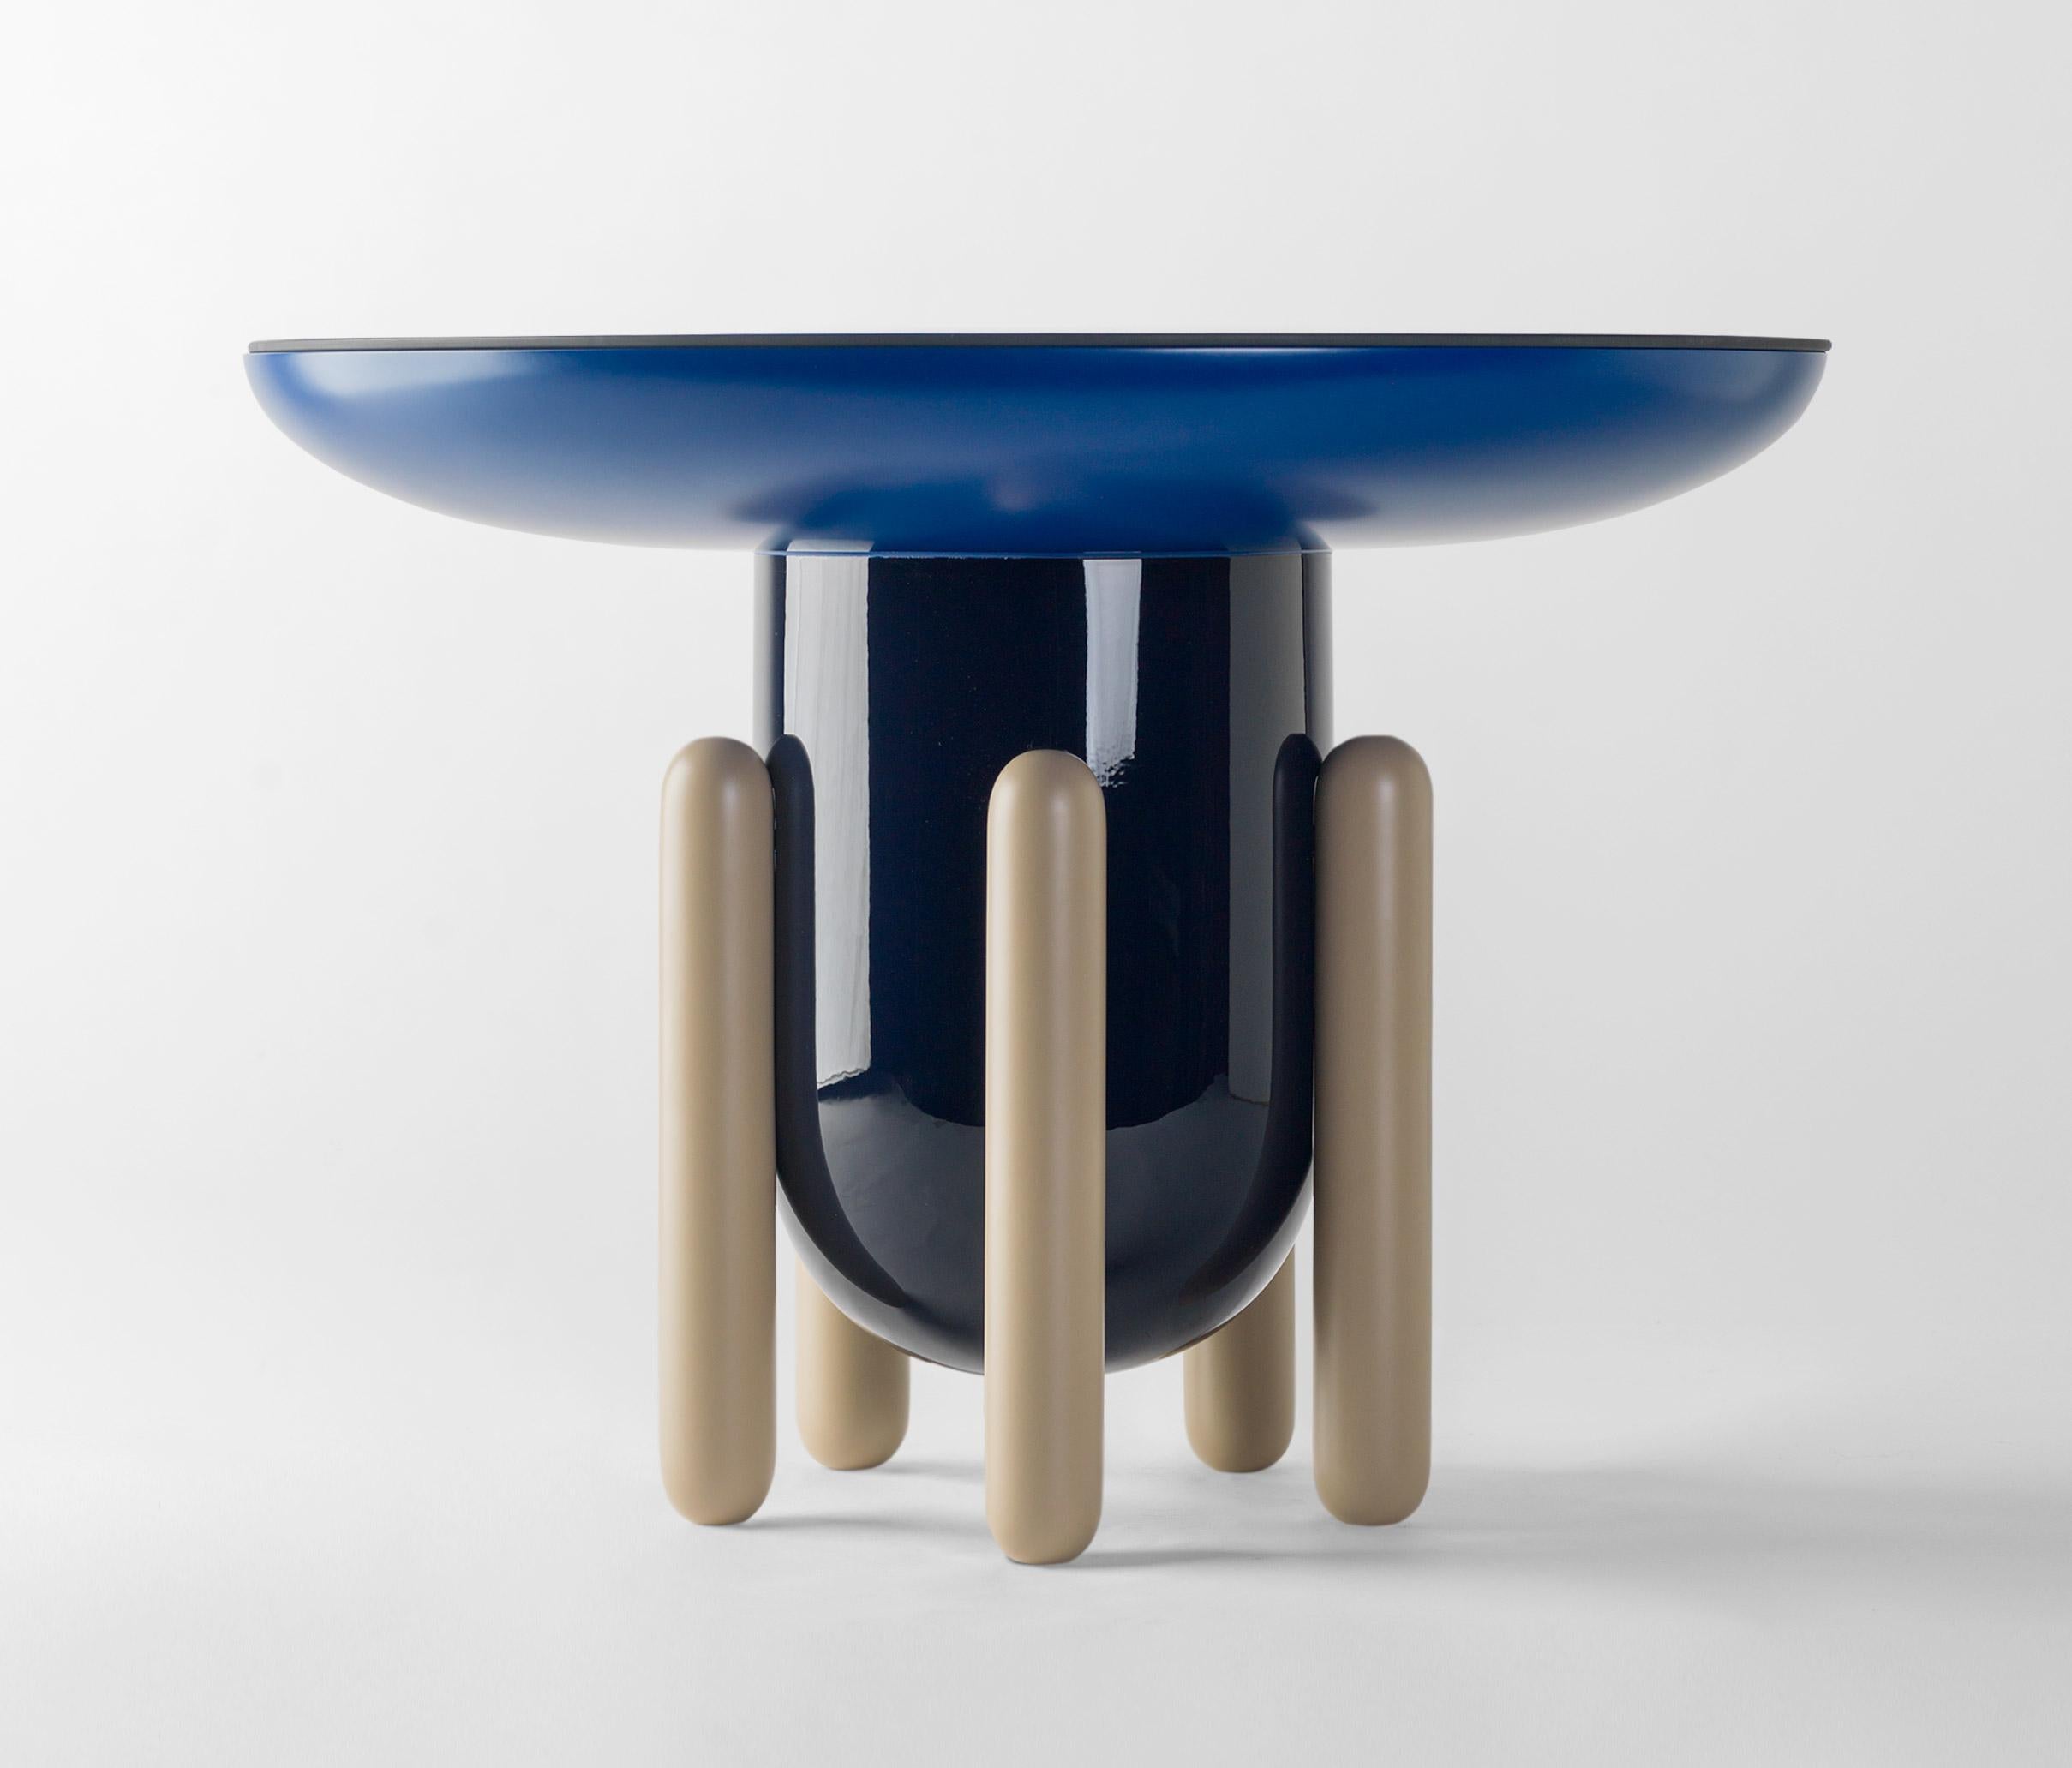 Explorer table Model 60 designed by Jaime Hayon for BD Barcelona creates an elegant beauty where it is placed. Spanish artist-designer Jaime Hayon is one of the most acclaimed creators worldwide. Hayon’s esteem and knowledge of artisan skills and